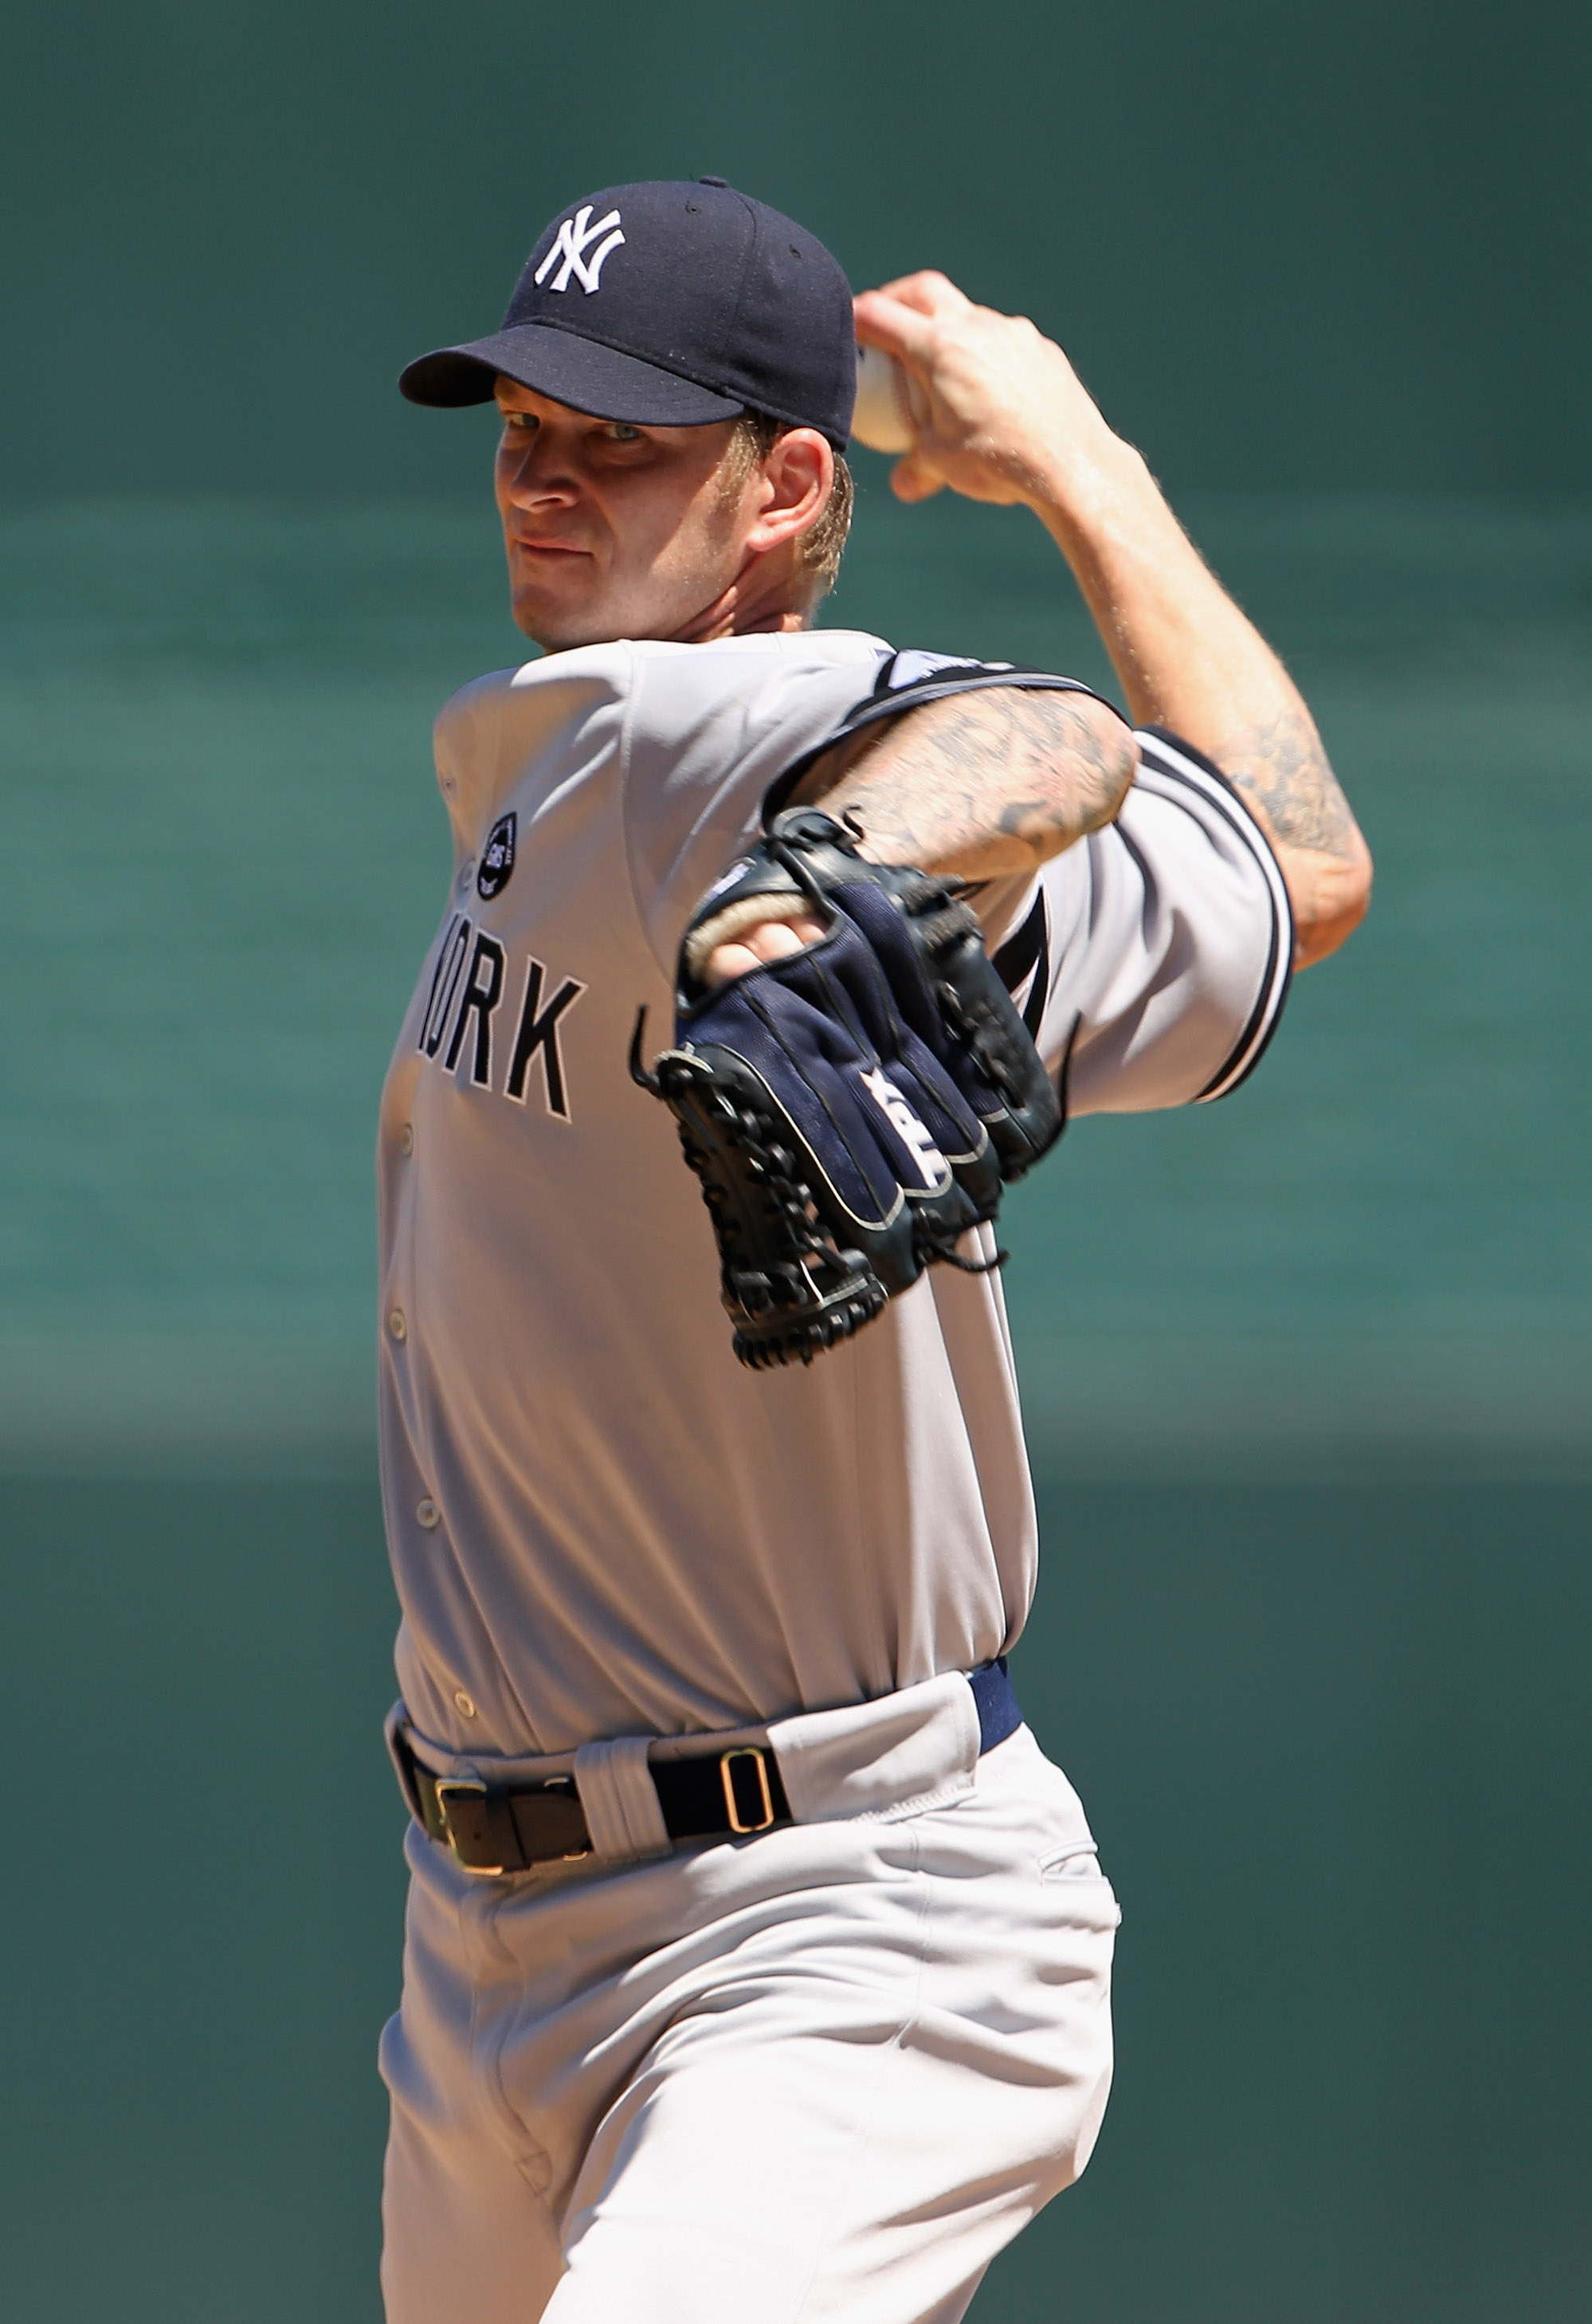 KANSAS CITY, MO - AUGUST 15:  Starting pitcher A.J. Burnett #34 of the New York Yankees in action during the game against the Kansas City Royals on August 15, 2010 at Kauffman stadium in Kansas City, Missouri.  (Photo by Jamie Squire/Getty Images)